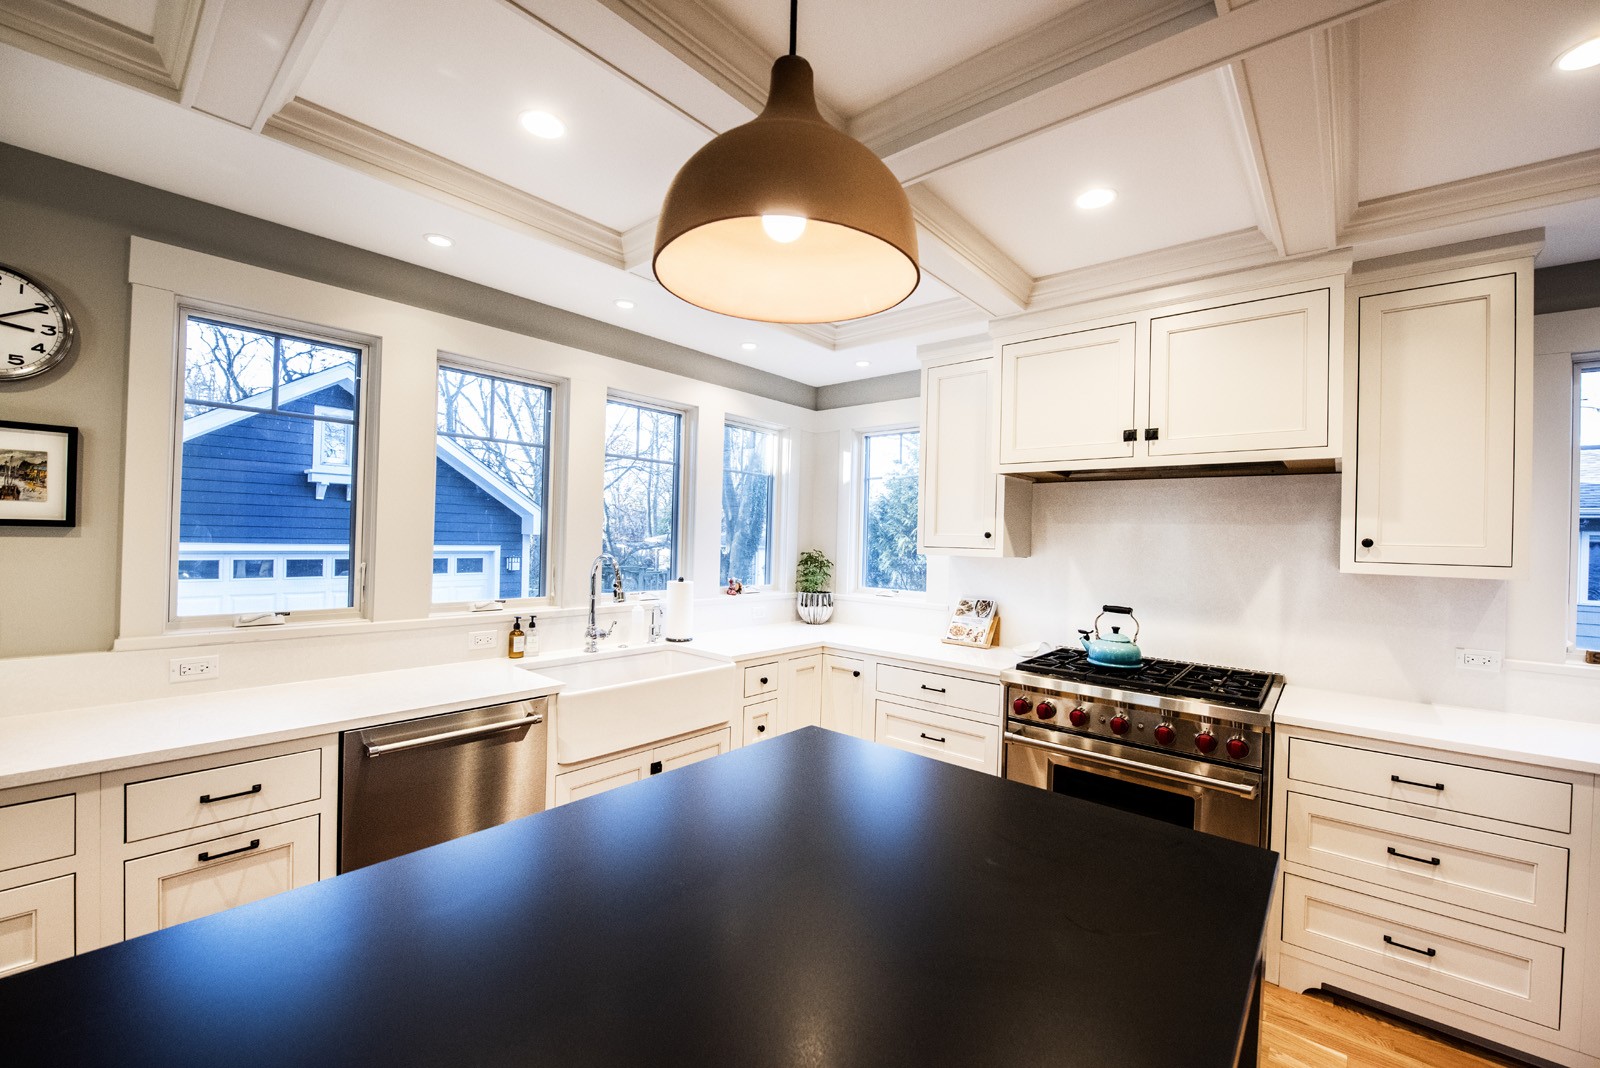 livco kitchen remodeling white cabinets patterned ceiling large light fixture over dark island